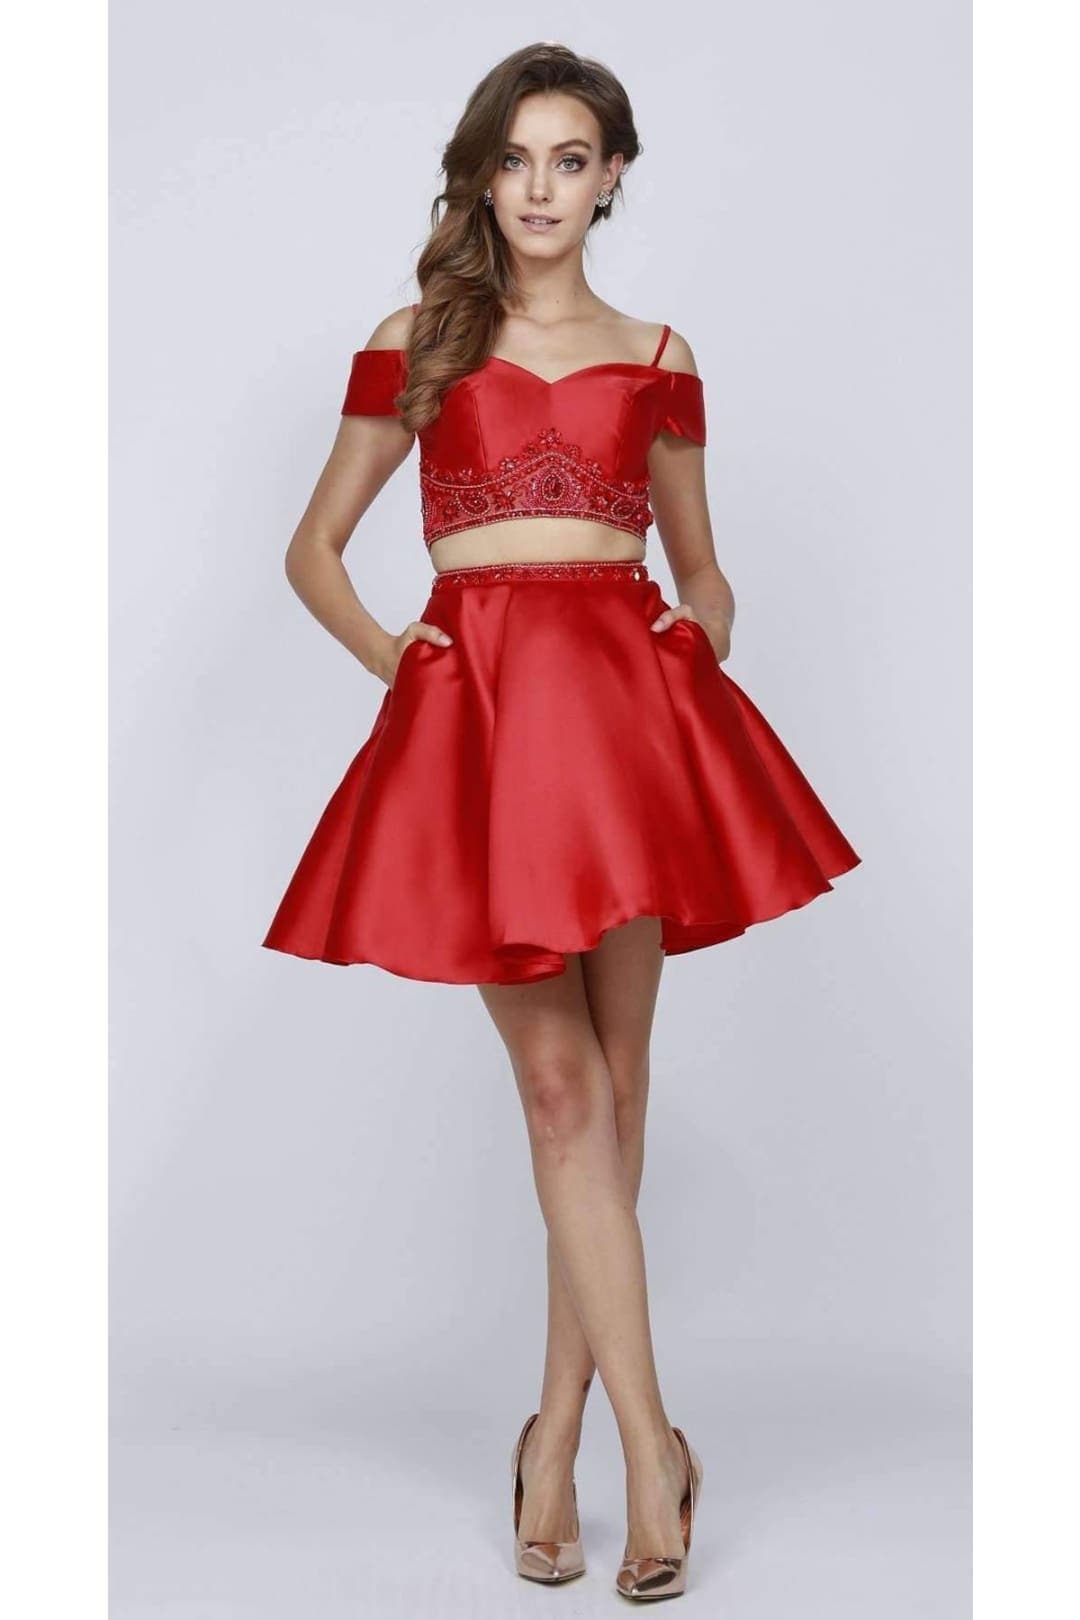 Cute Two Piece Cocktail Dress - Red / XS